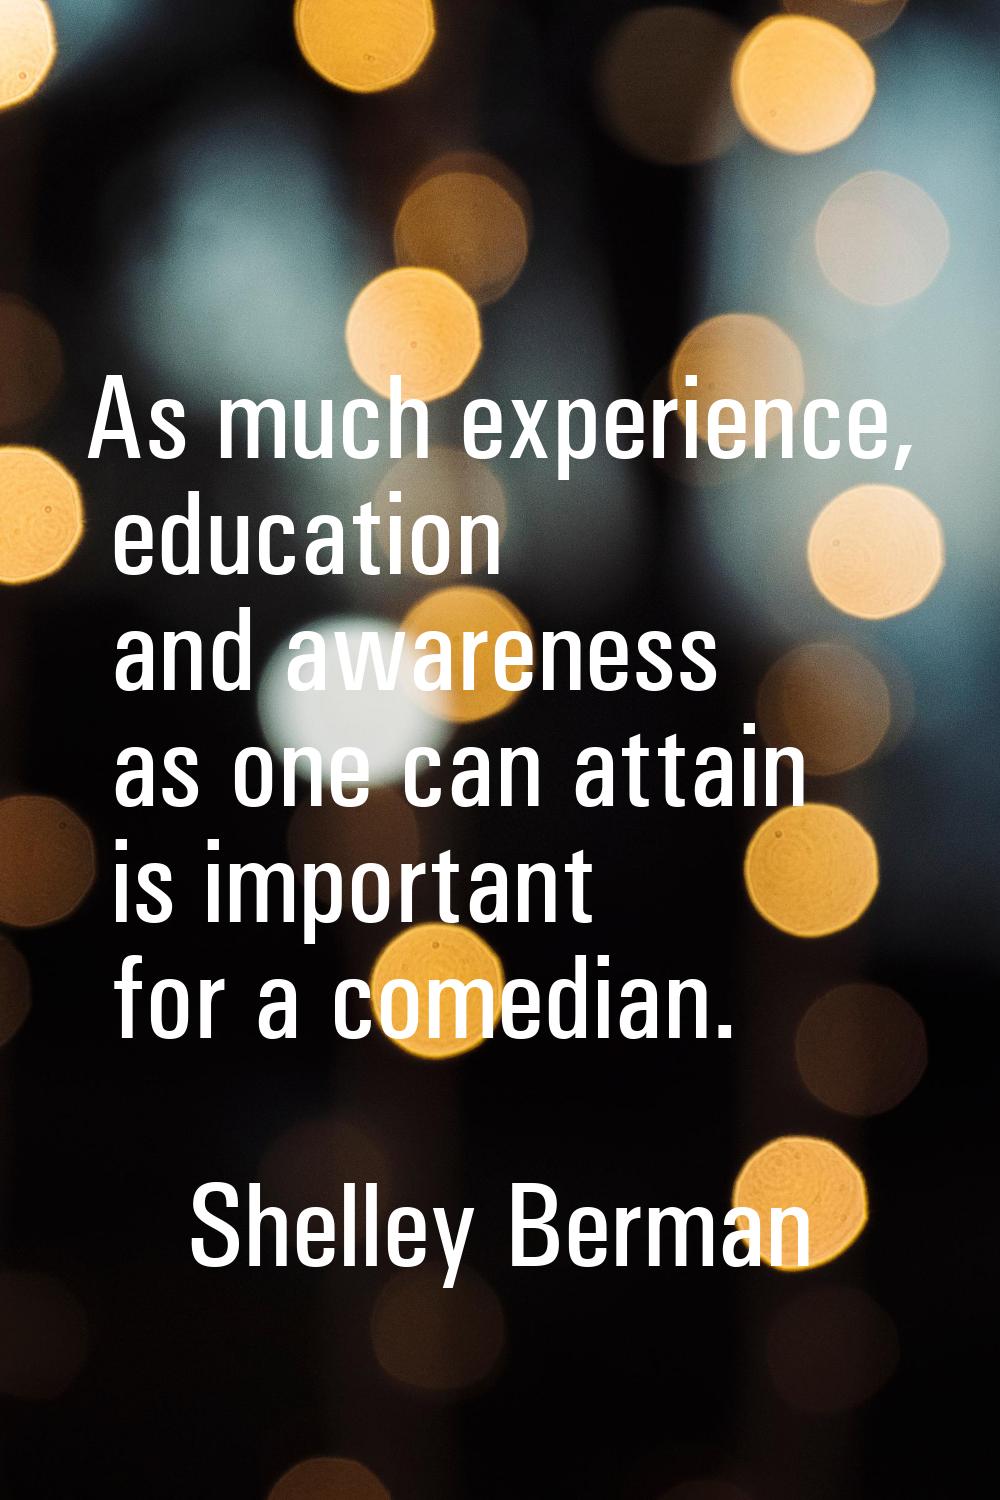 As much experience, education and awareness as one can attain is important for a comedian.